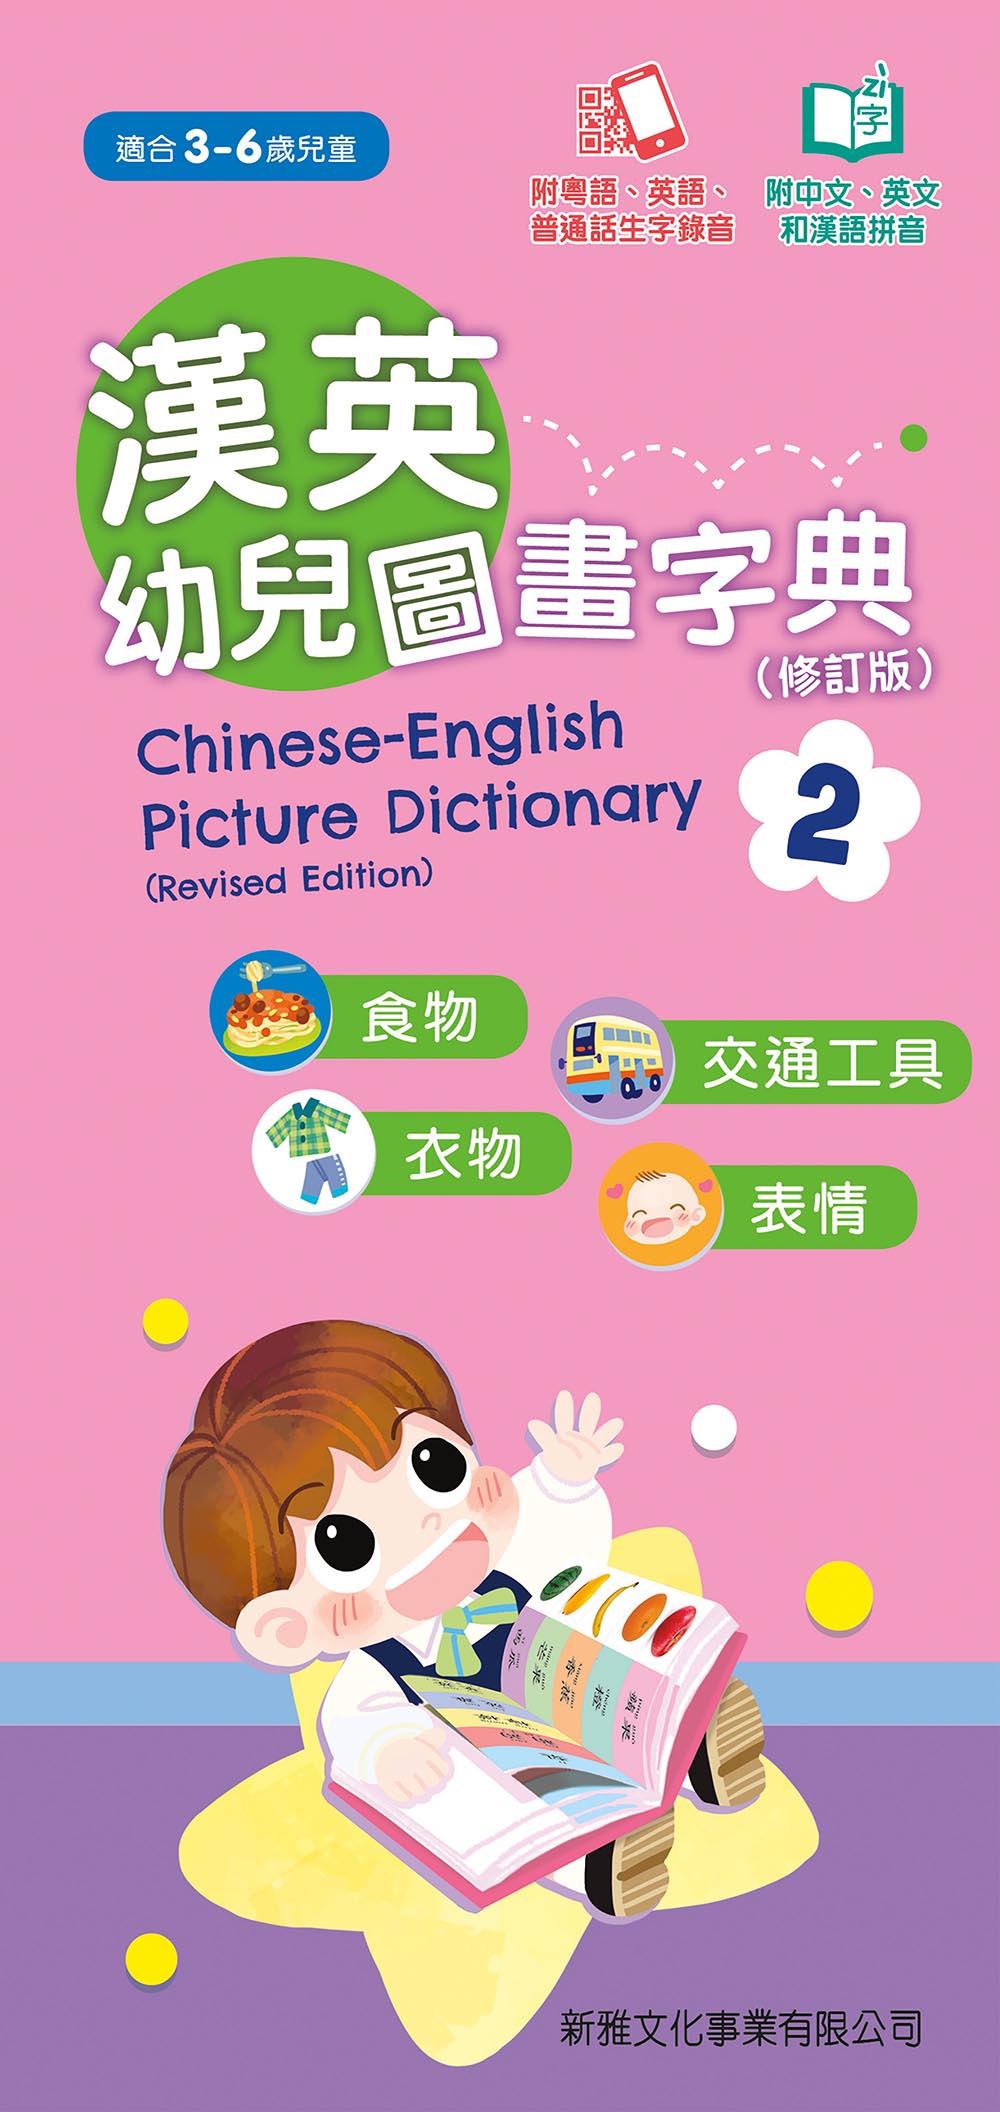 Chinese-English Picture Dictionary for Children #2 (Audio in Cantonese, Mandarin, and English - QR Code) • 漢英幼兒圖畫字典2 (修訂版)  (QR Code)